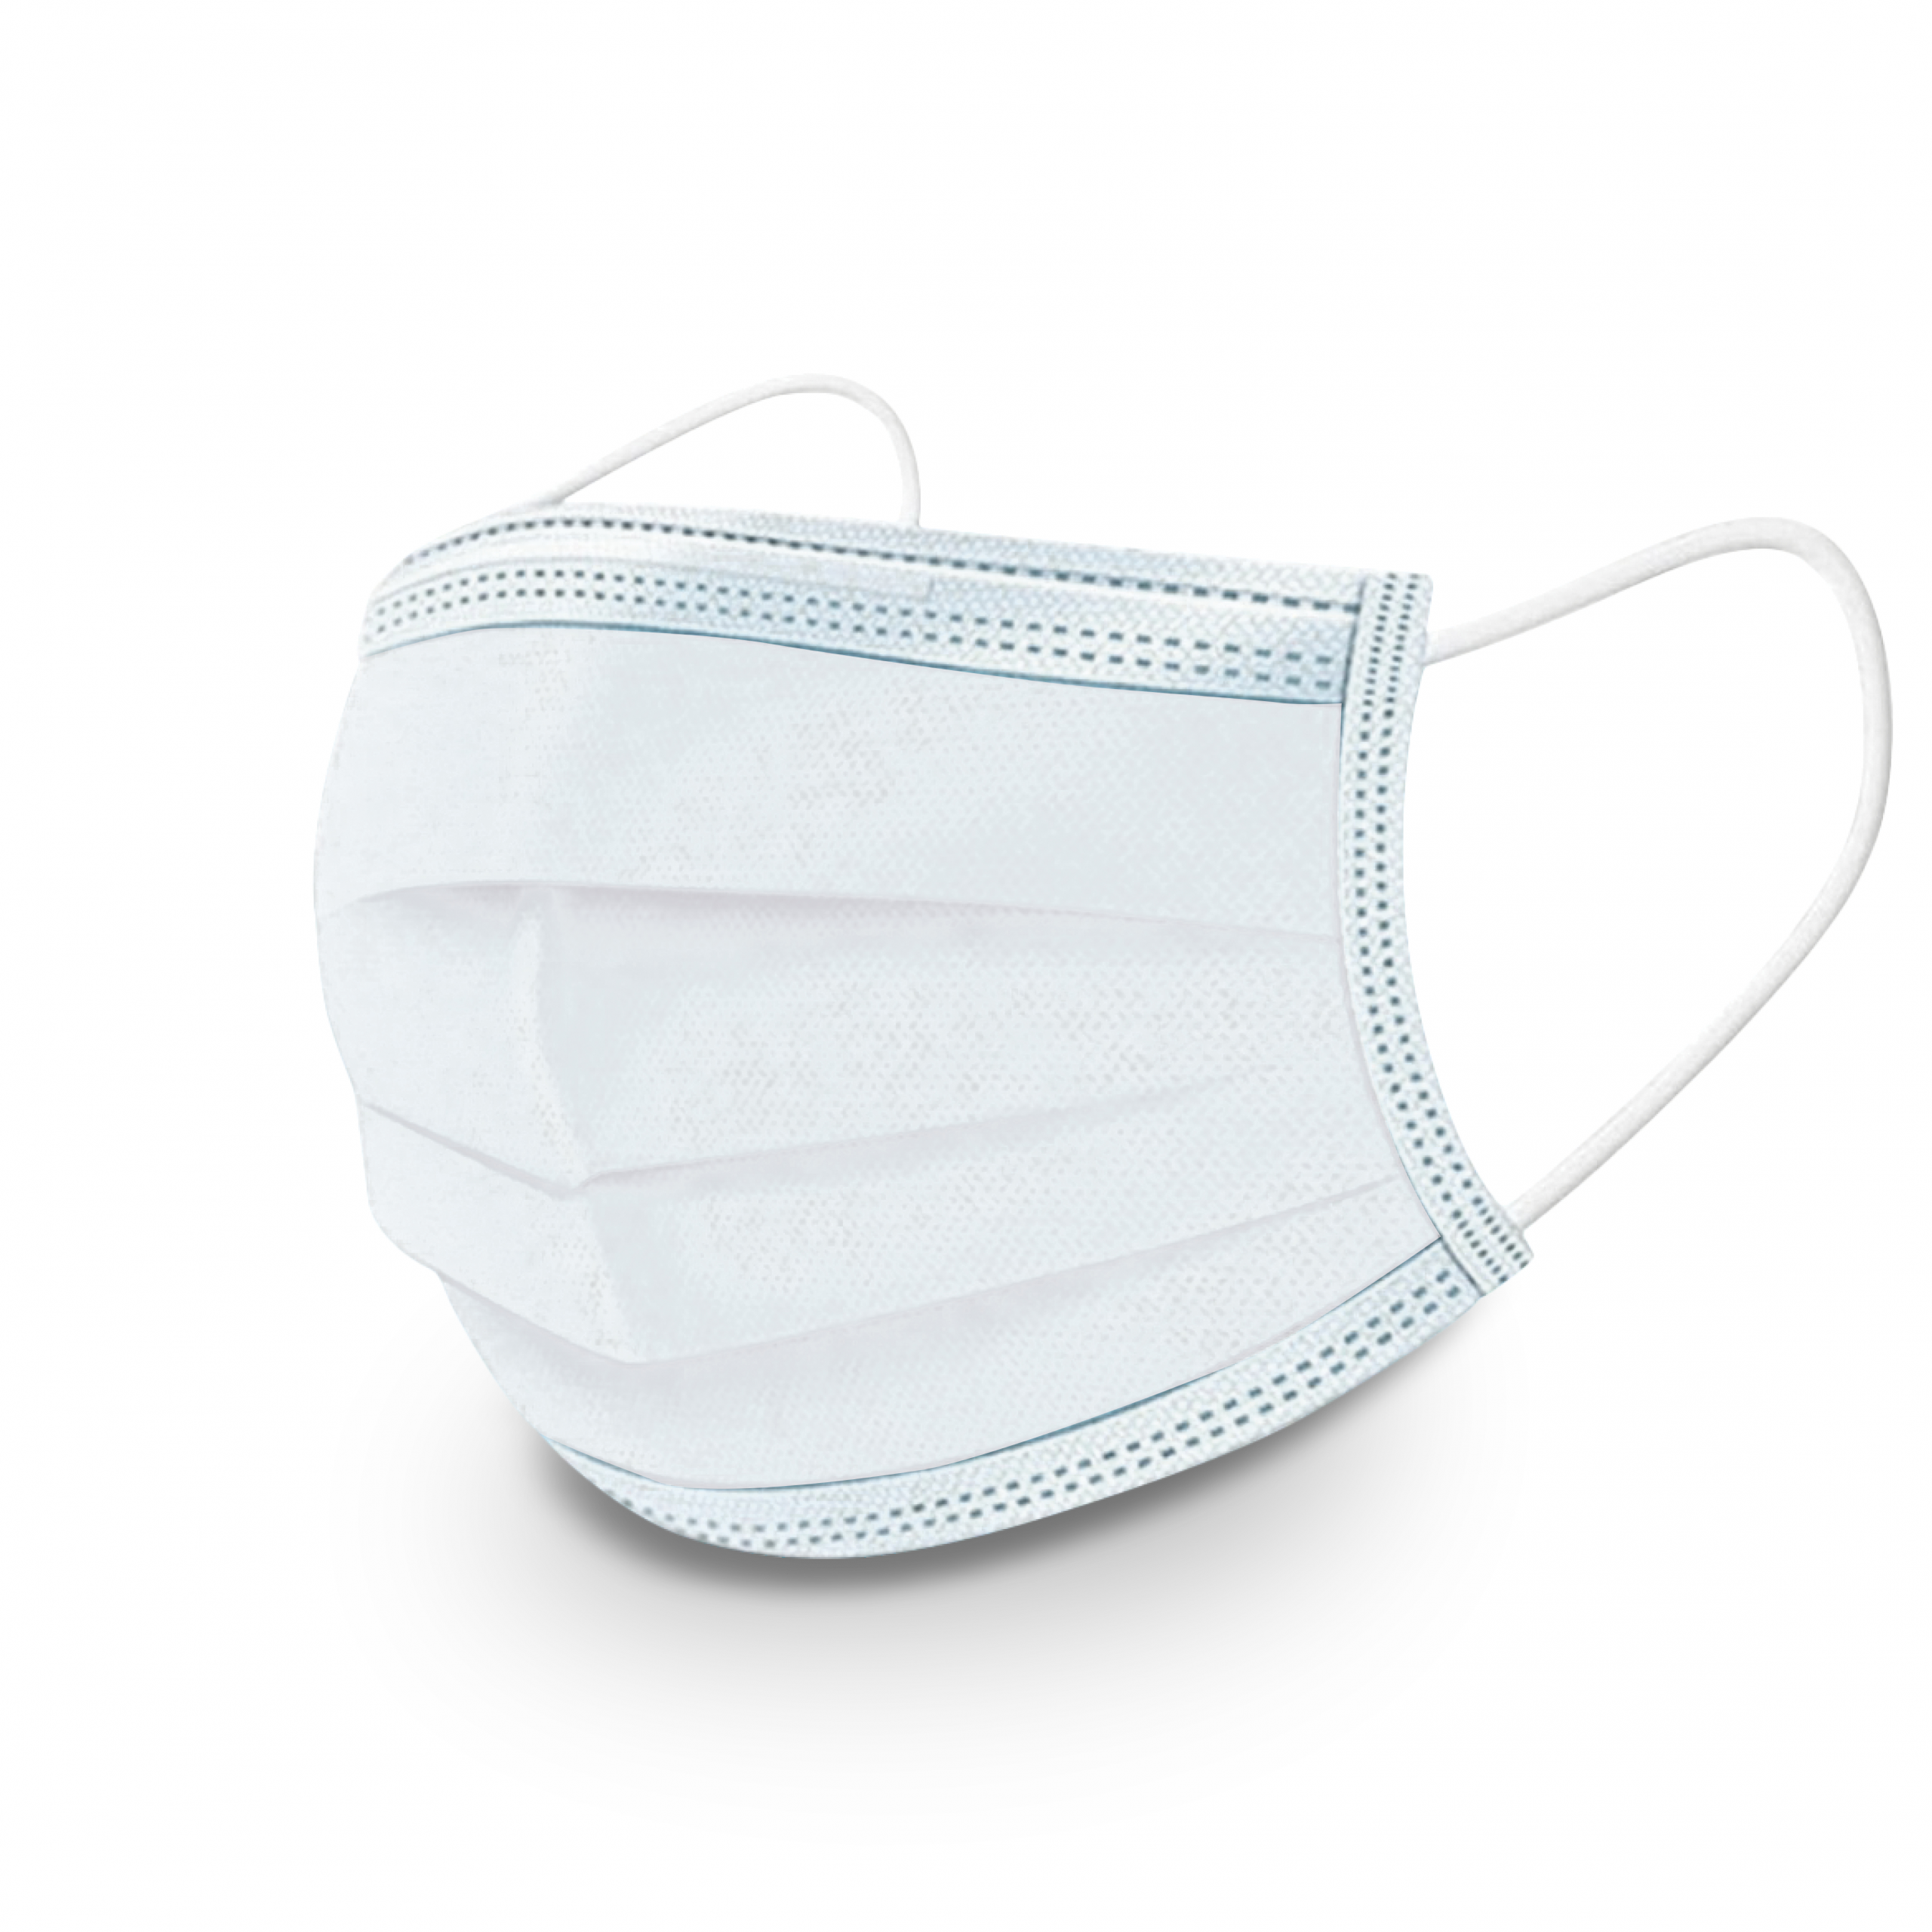 Frontline Iir Surgical Masks By Frontline. Buy Now Online. serapportantà China Type Iir Mask Factory 